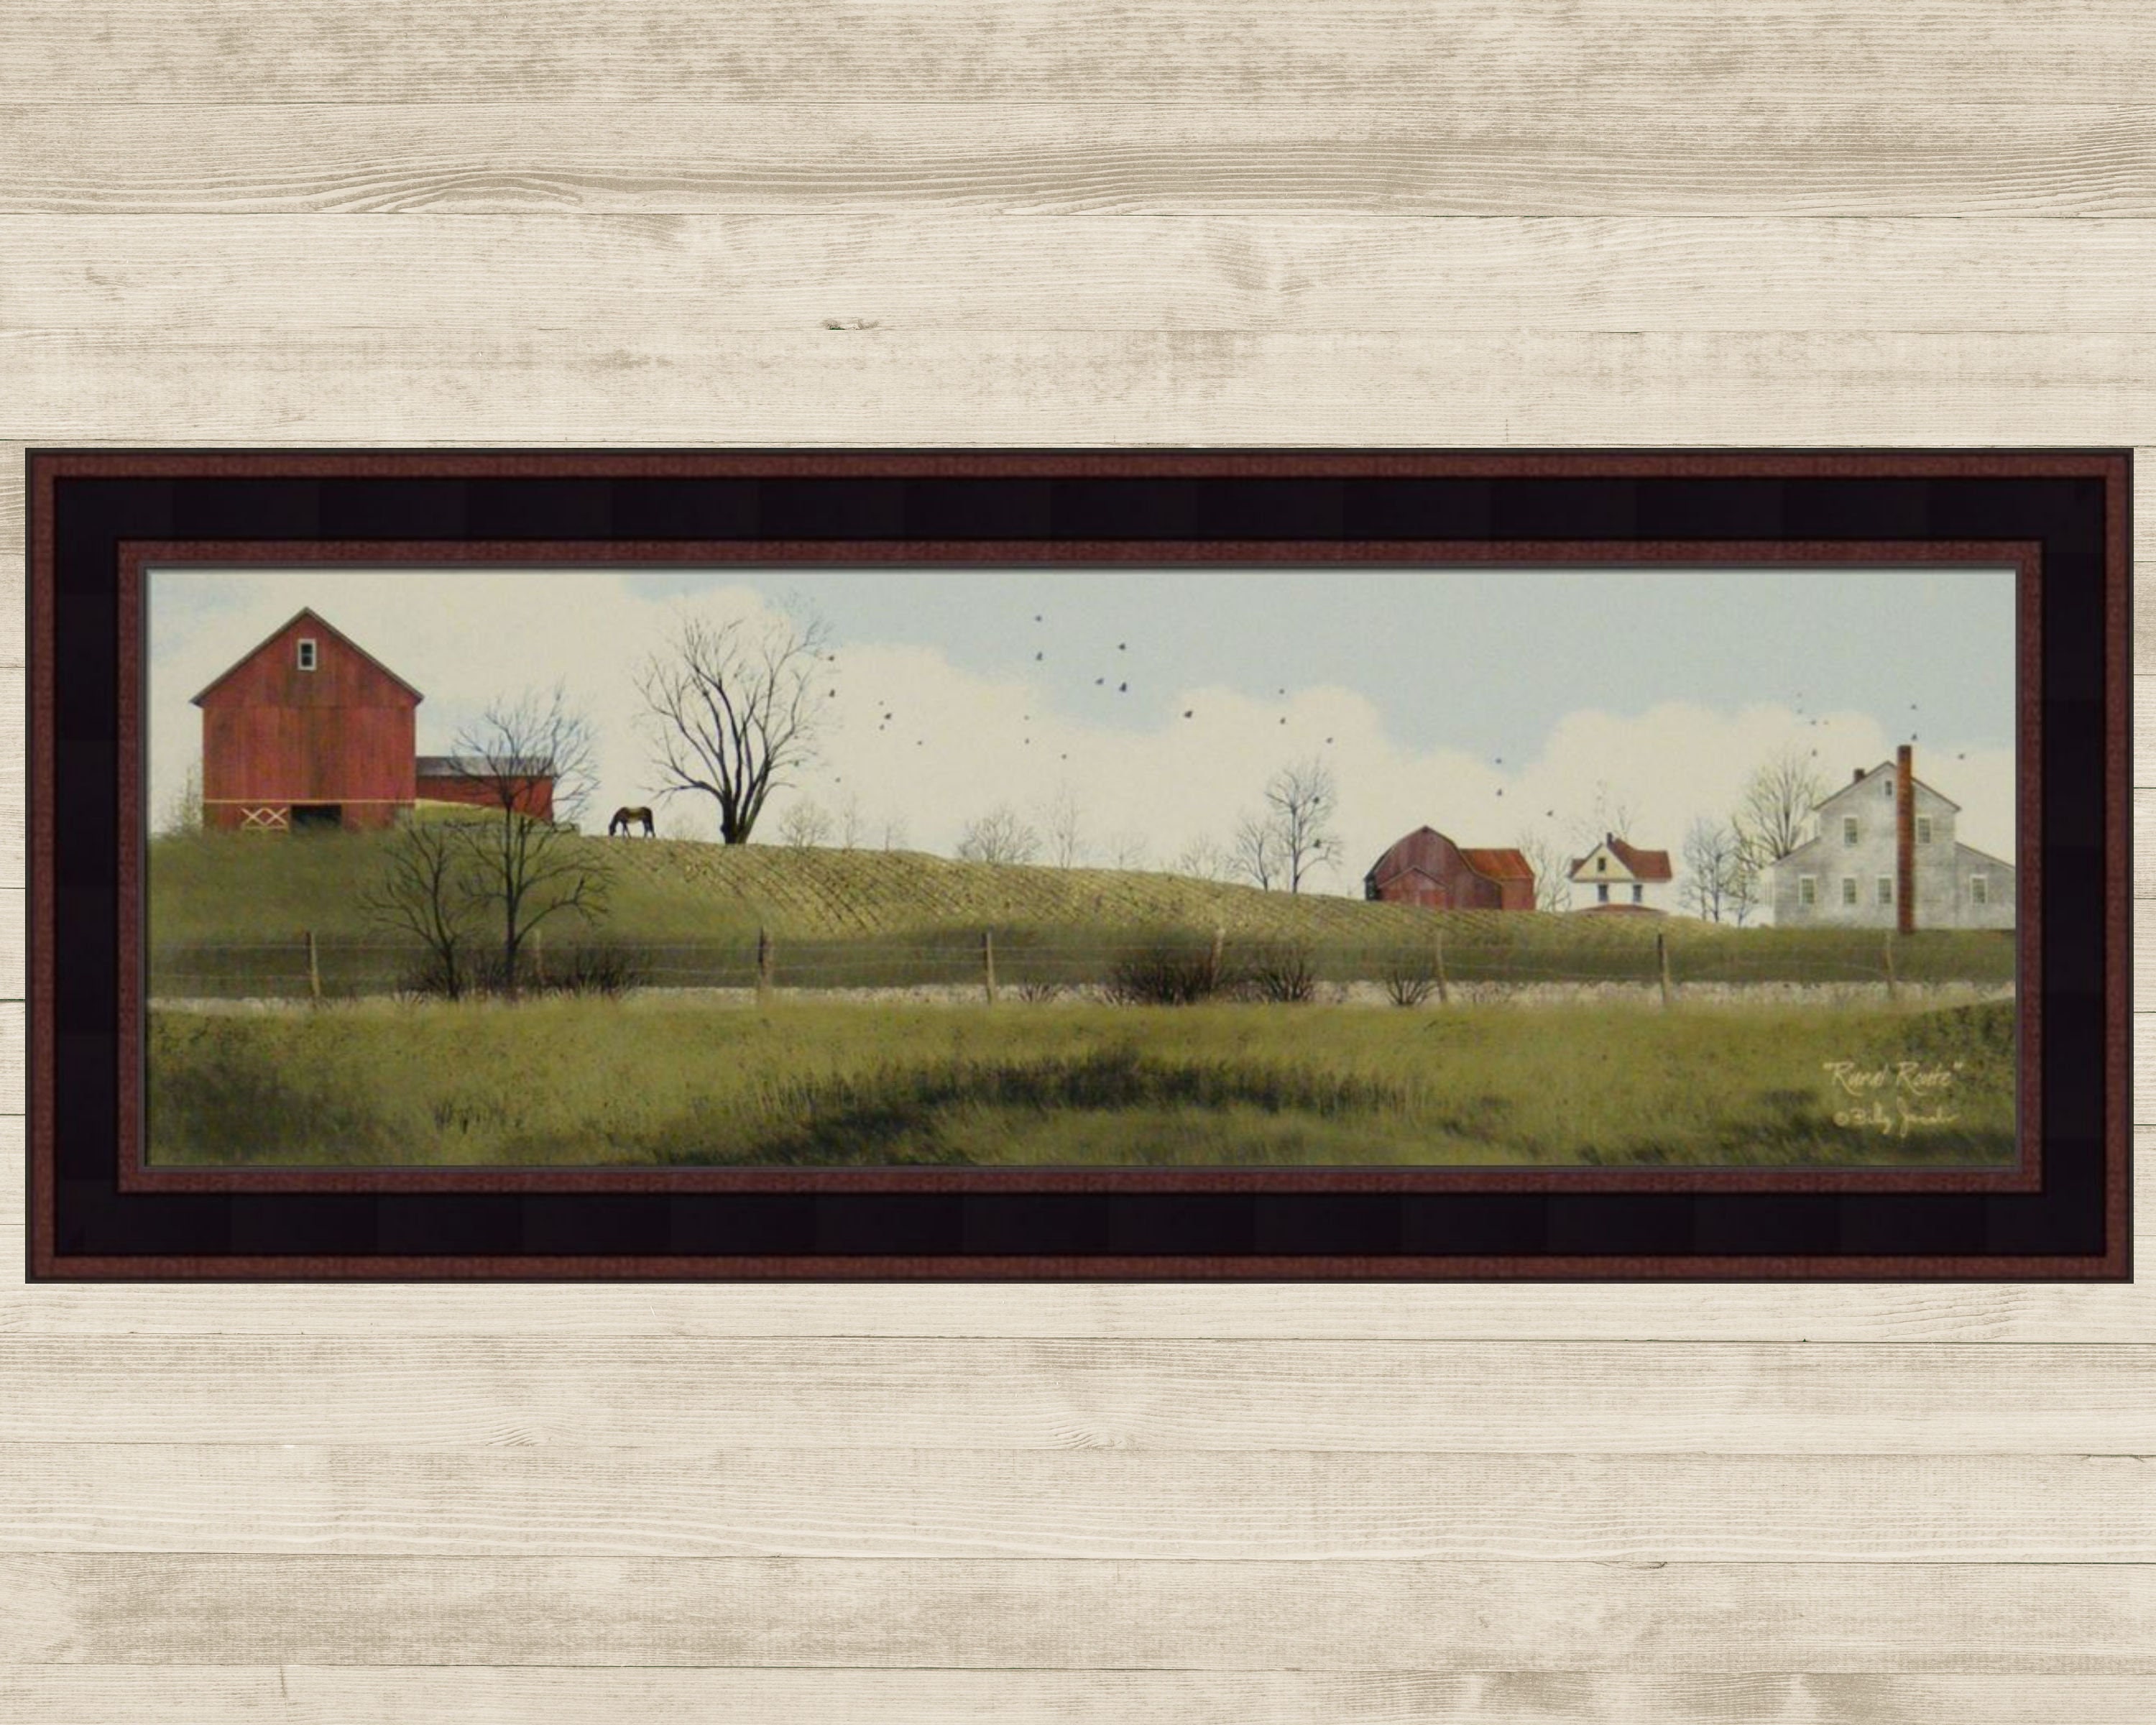 RURAL ROUTE by Billy Jacobs 12x28 FRAMED ART PICTURE Farm House Red Barn Horse 